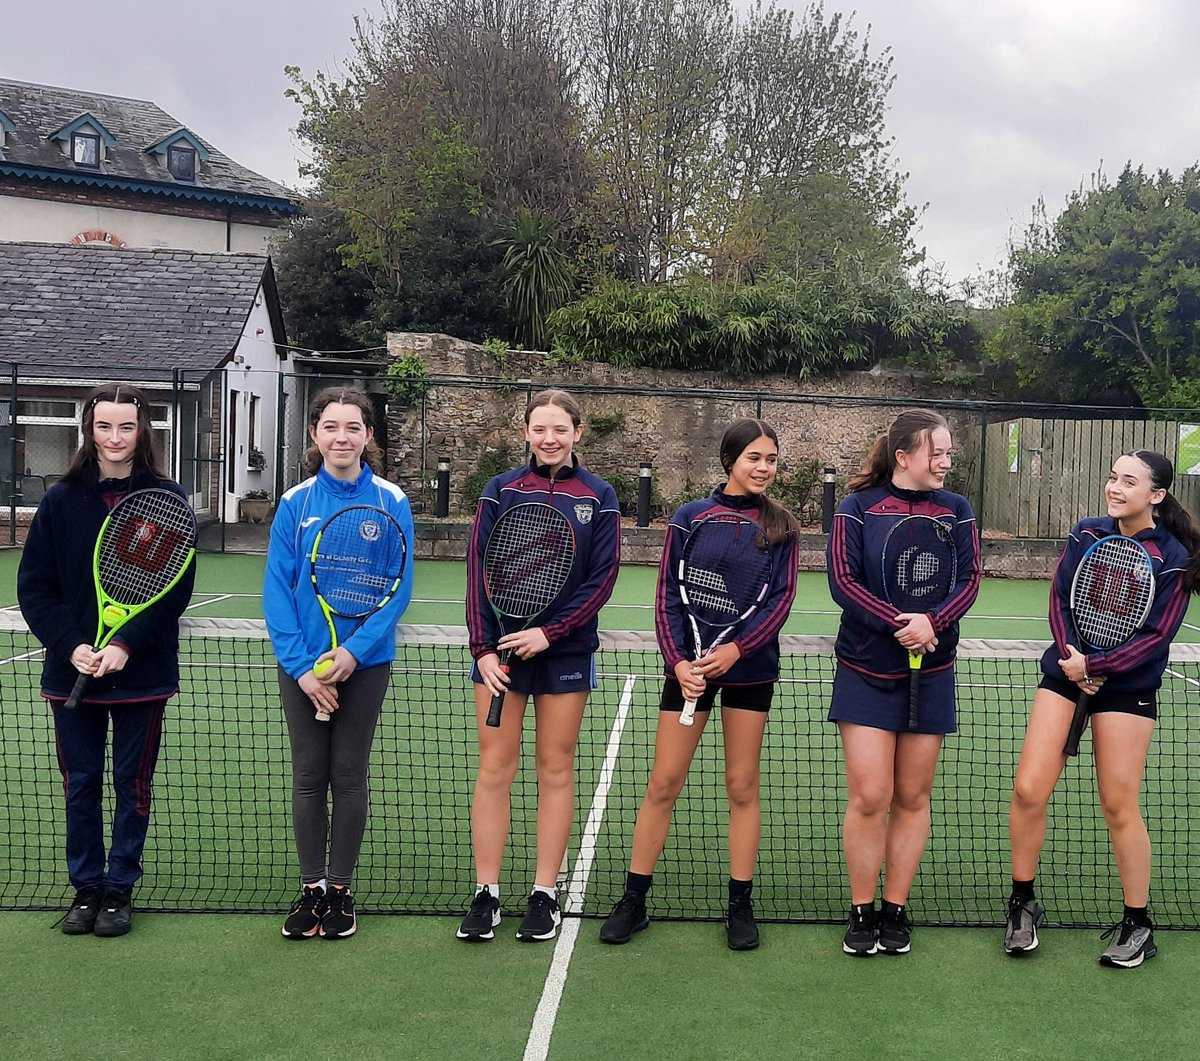 Hard luck to our @StMarysCollege 1st year Minor Tennis squad who lost to a very strong Muckross Park College team on Friday in Donnybrook, great performance by all players! Best of luck in your upcoming matches 🎾